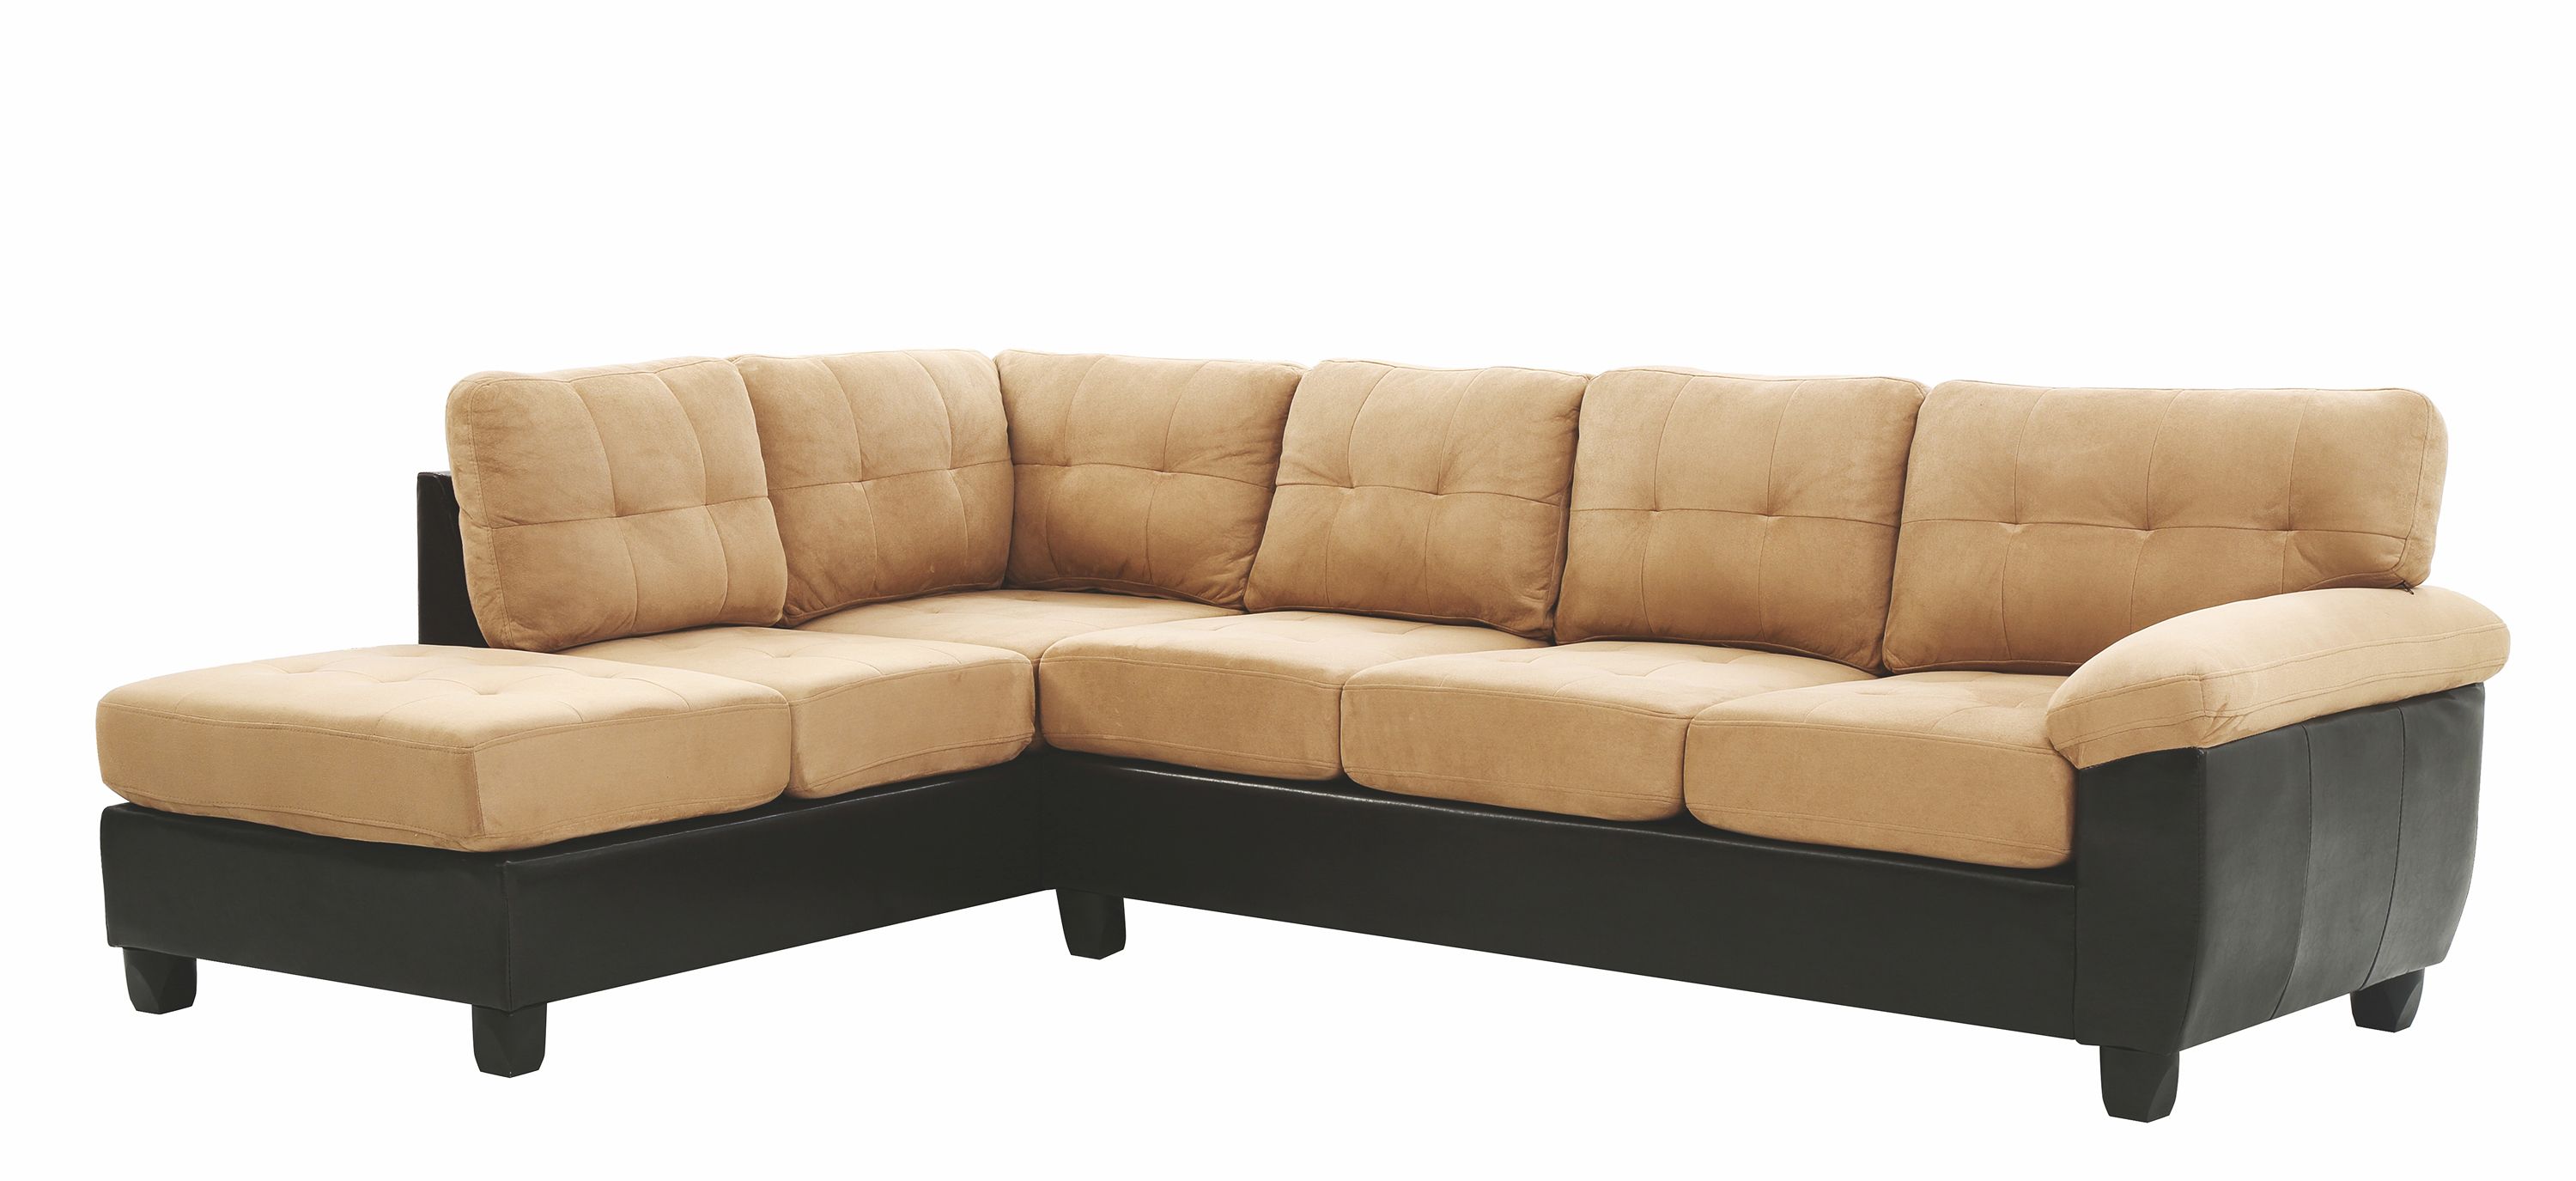 Varick 2-pc. Sectional w/ Chaise